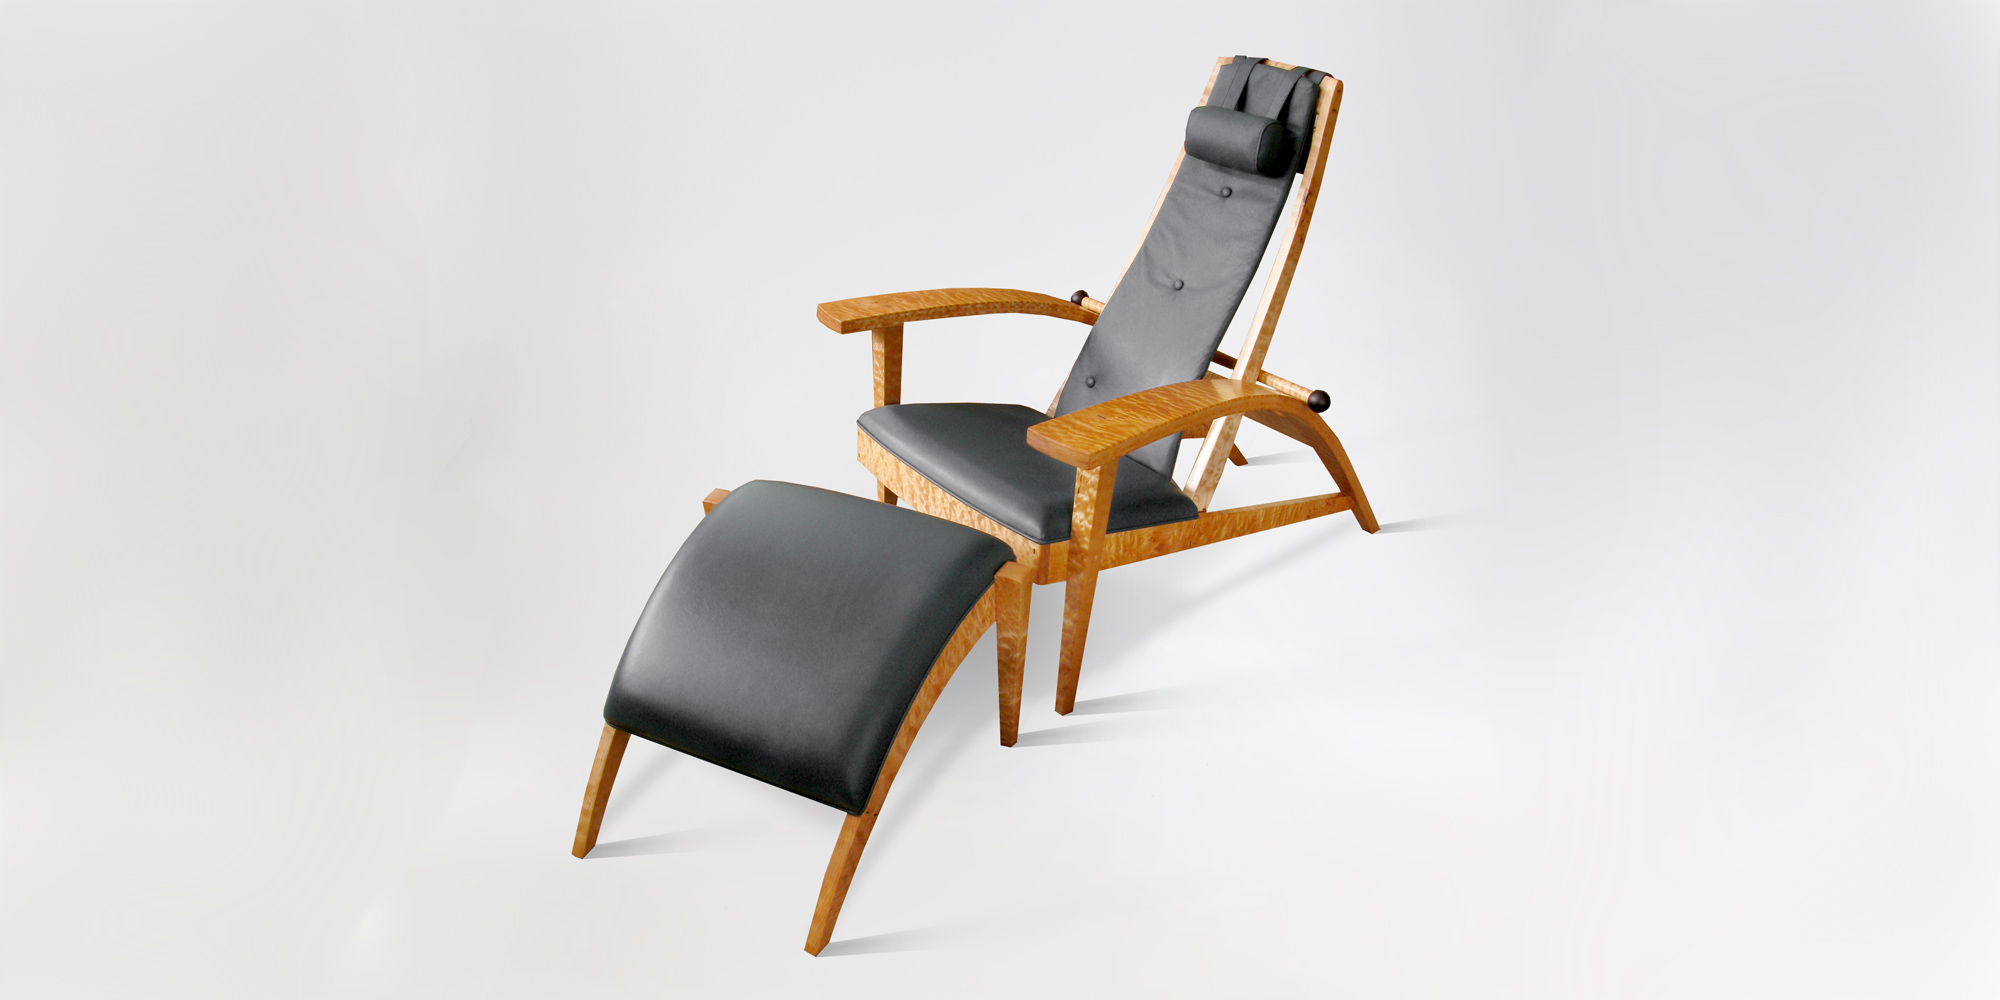 Our custom ergonomic Martinez Recliner w/ hand-sewn leather upholstery and foot stool